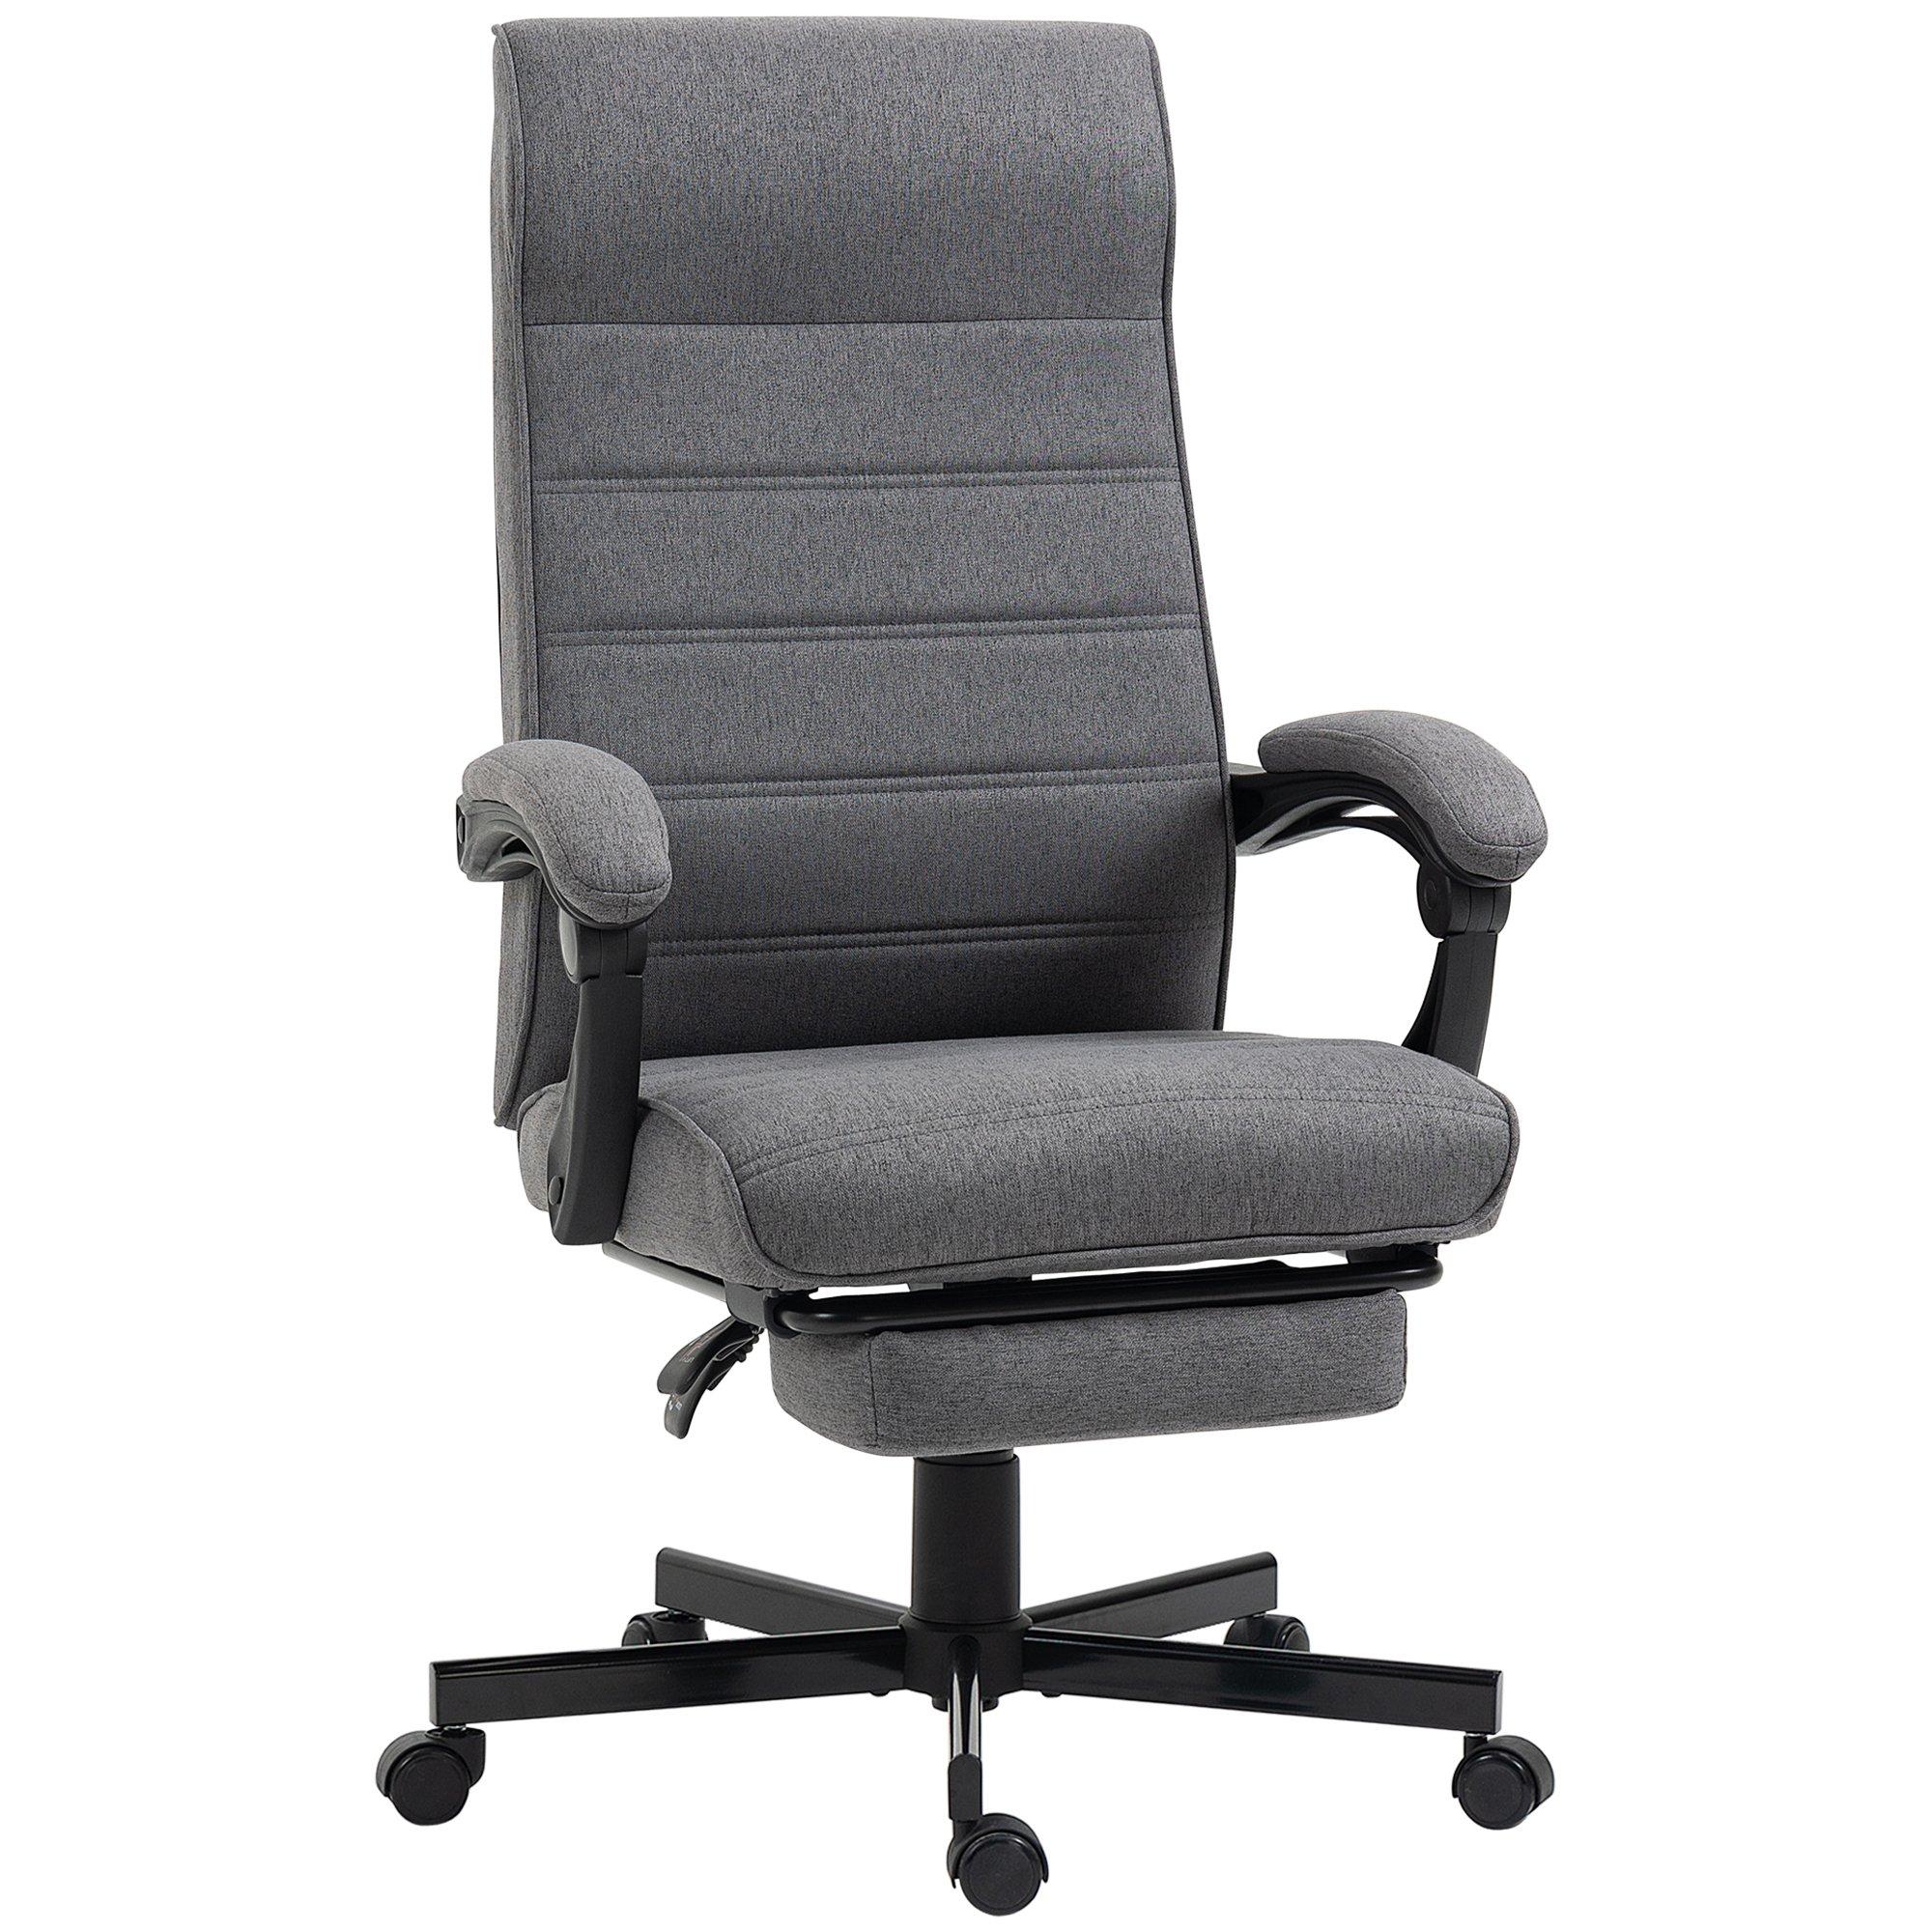 Home Office Chair High Back Reclining Chair for Bedroom Study